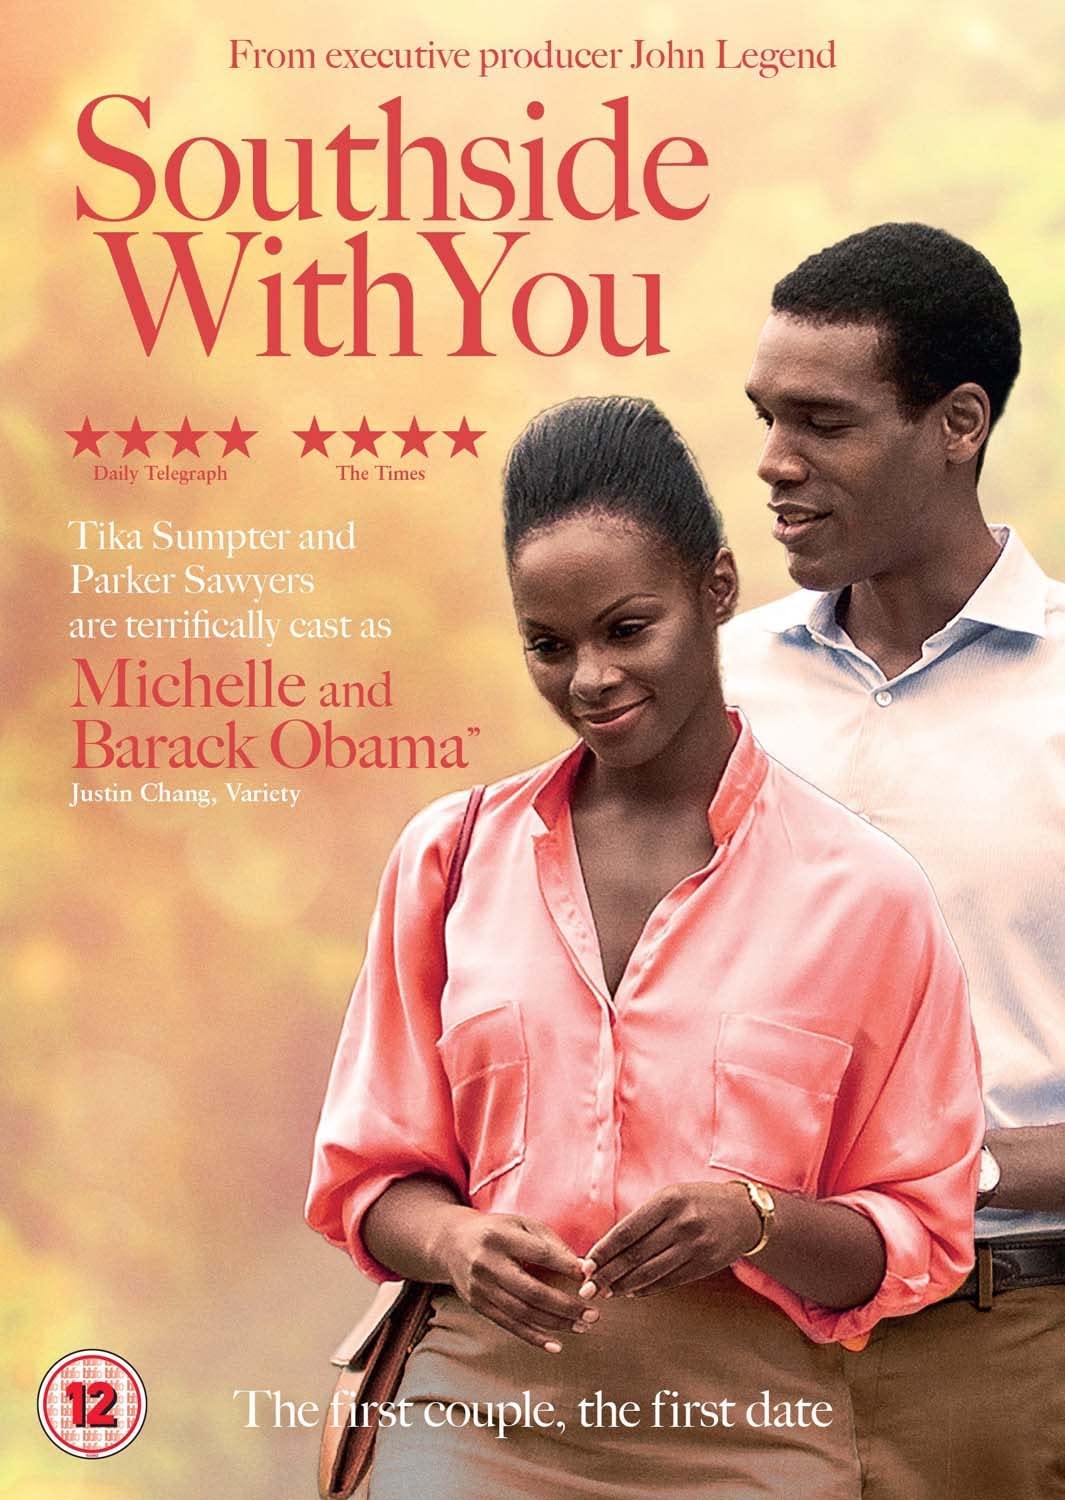 Southside With You [2016] - Romance/Drama [DVD]